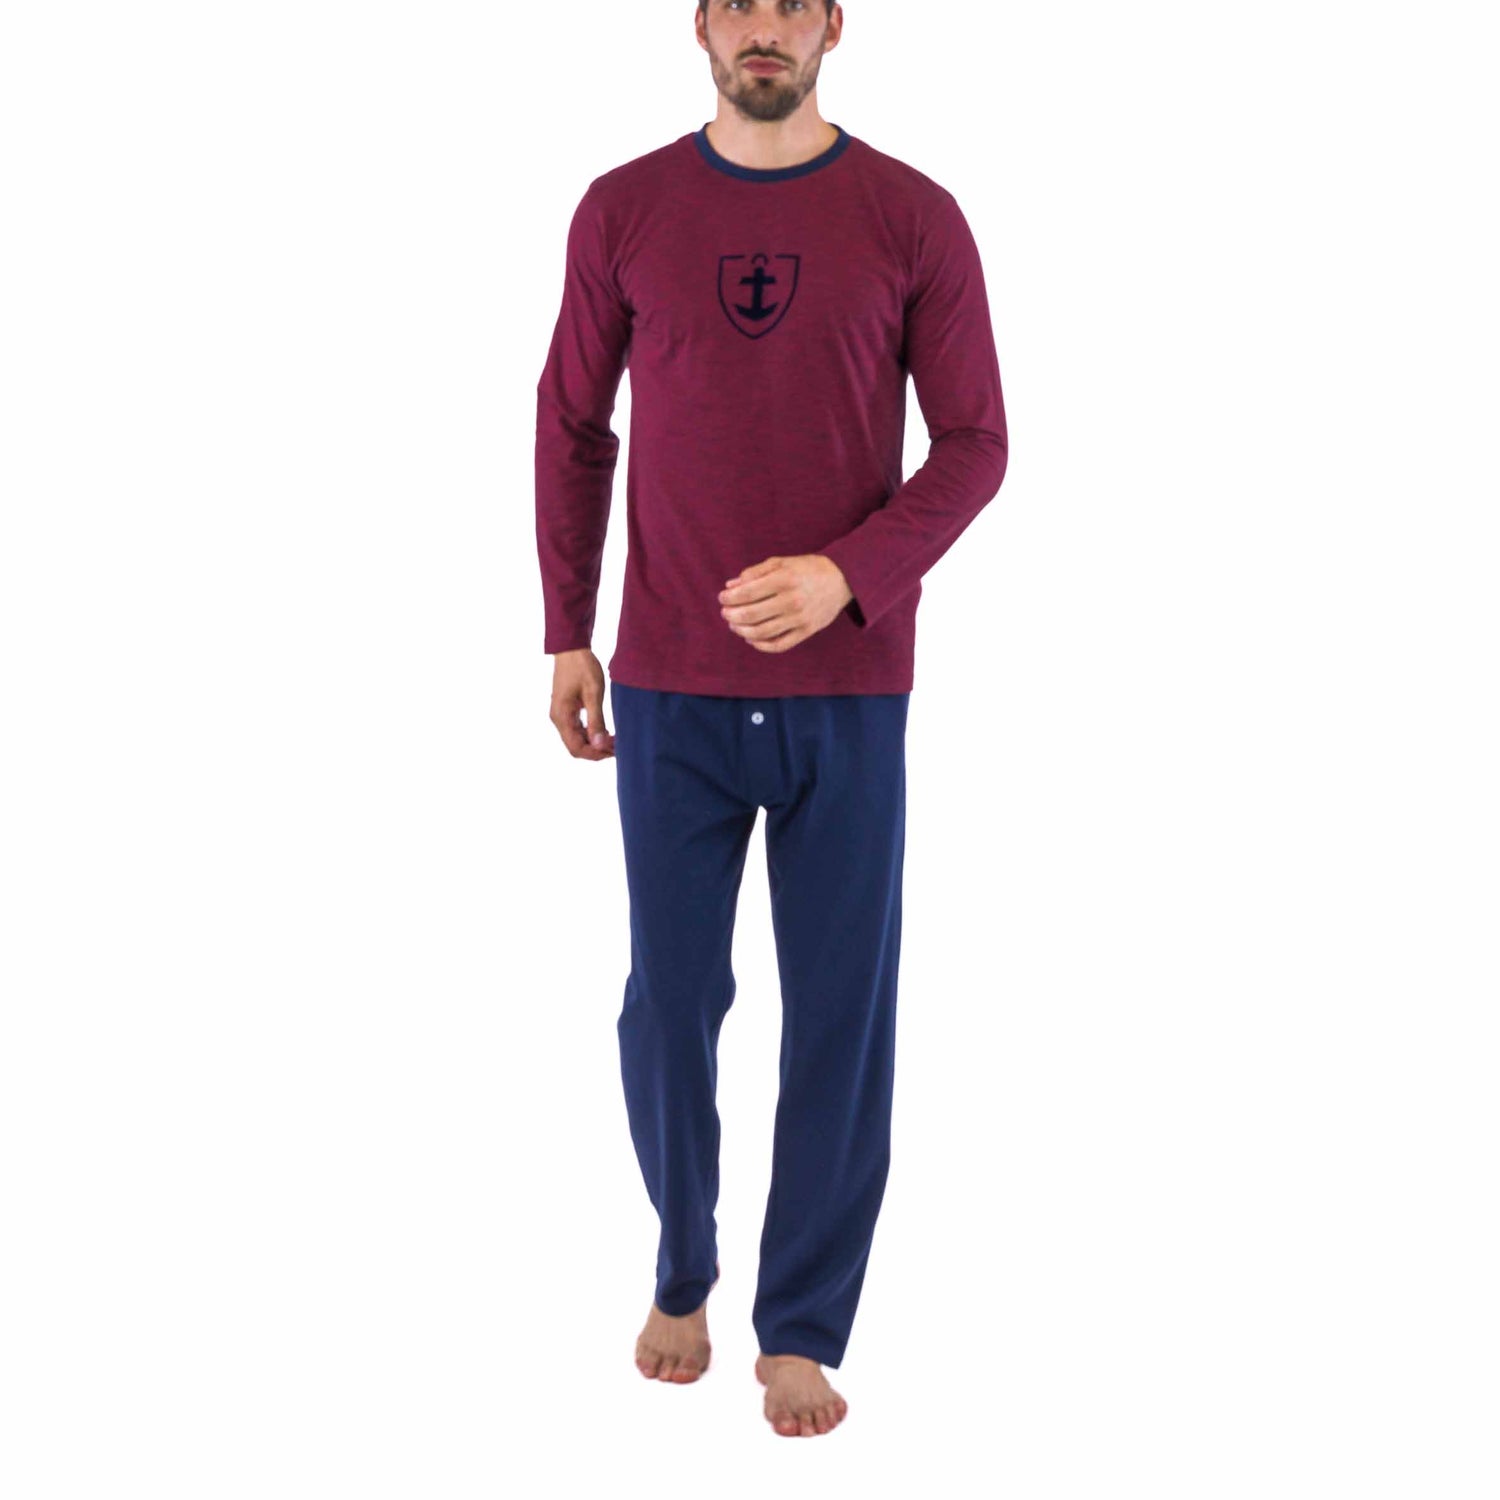 Round Neck Pajamas in Burgundy and Navy Cotton Jersey